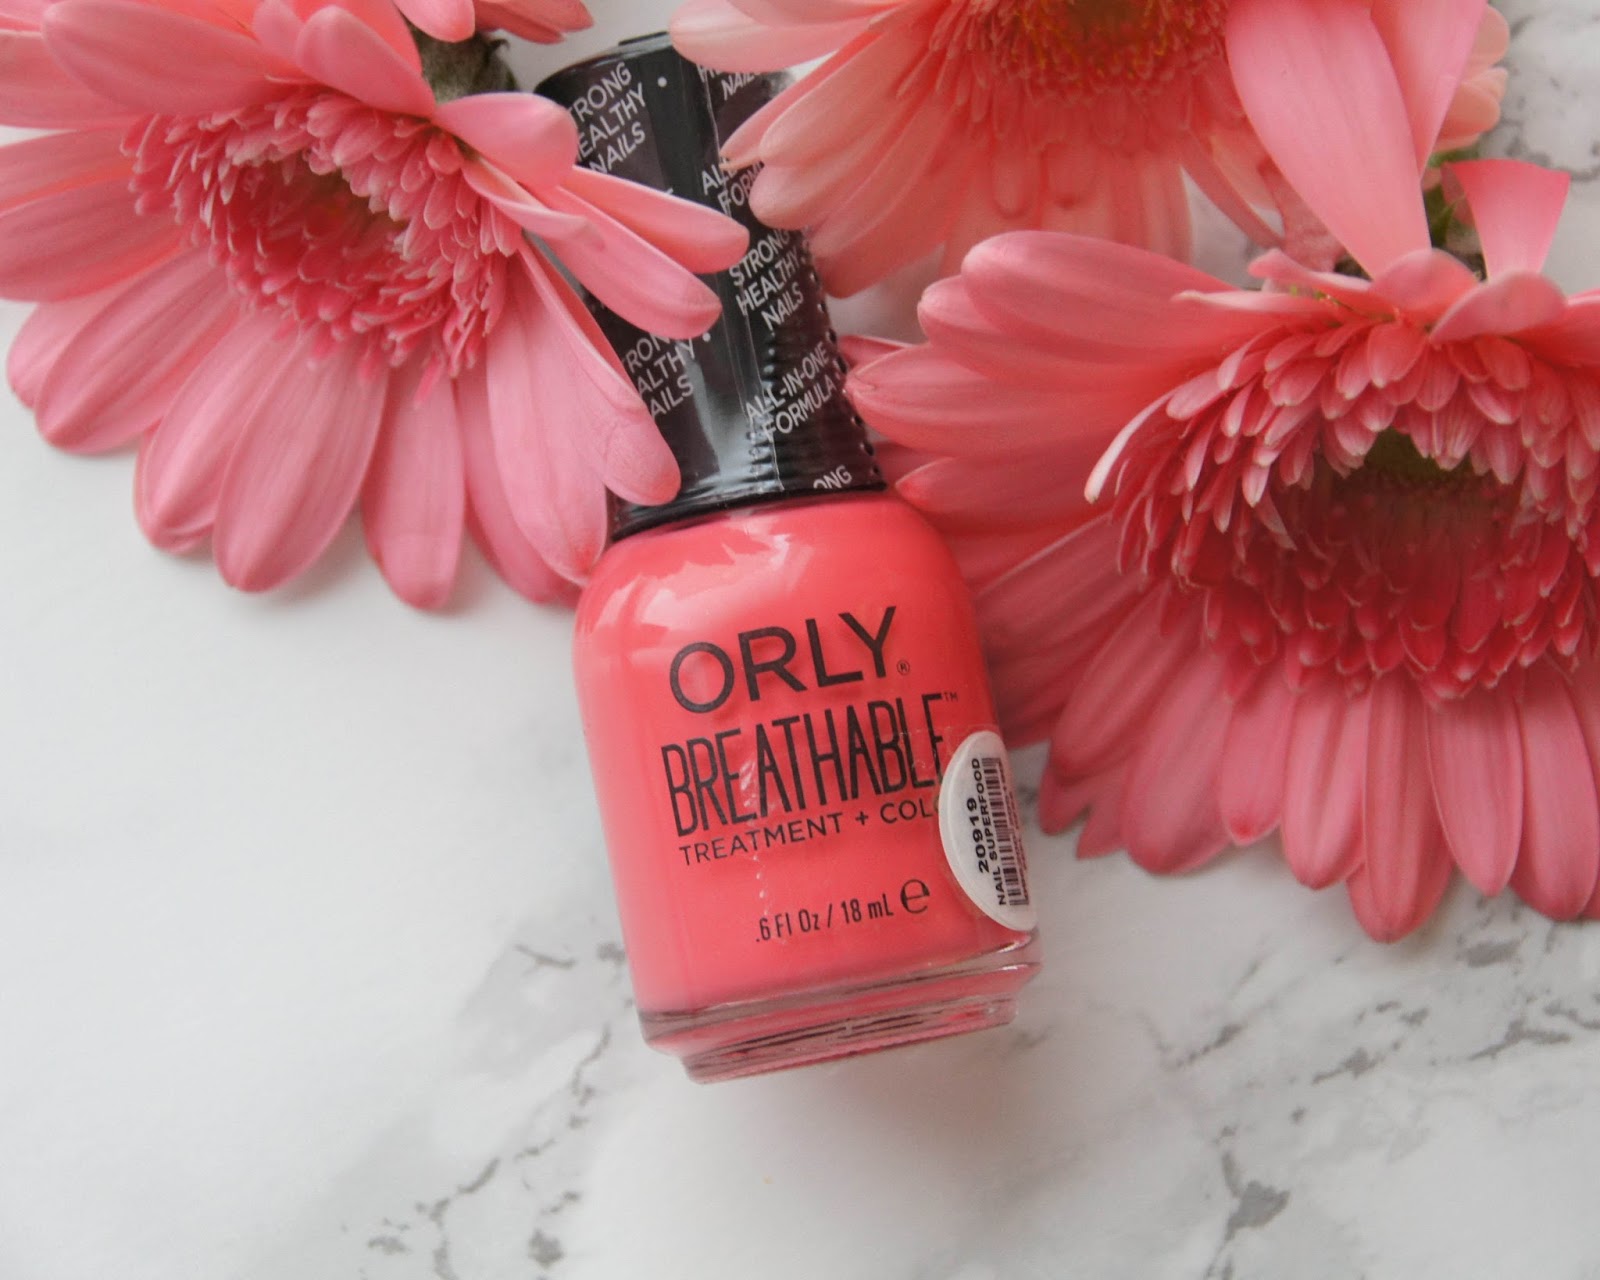 9. Orly Breathable Treatment + Color Nail Polish in "Different Color" - wide 5